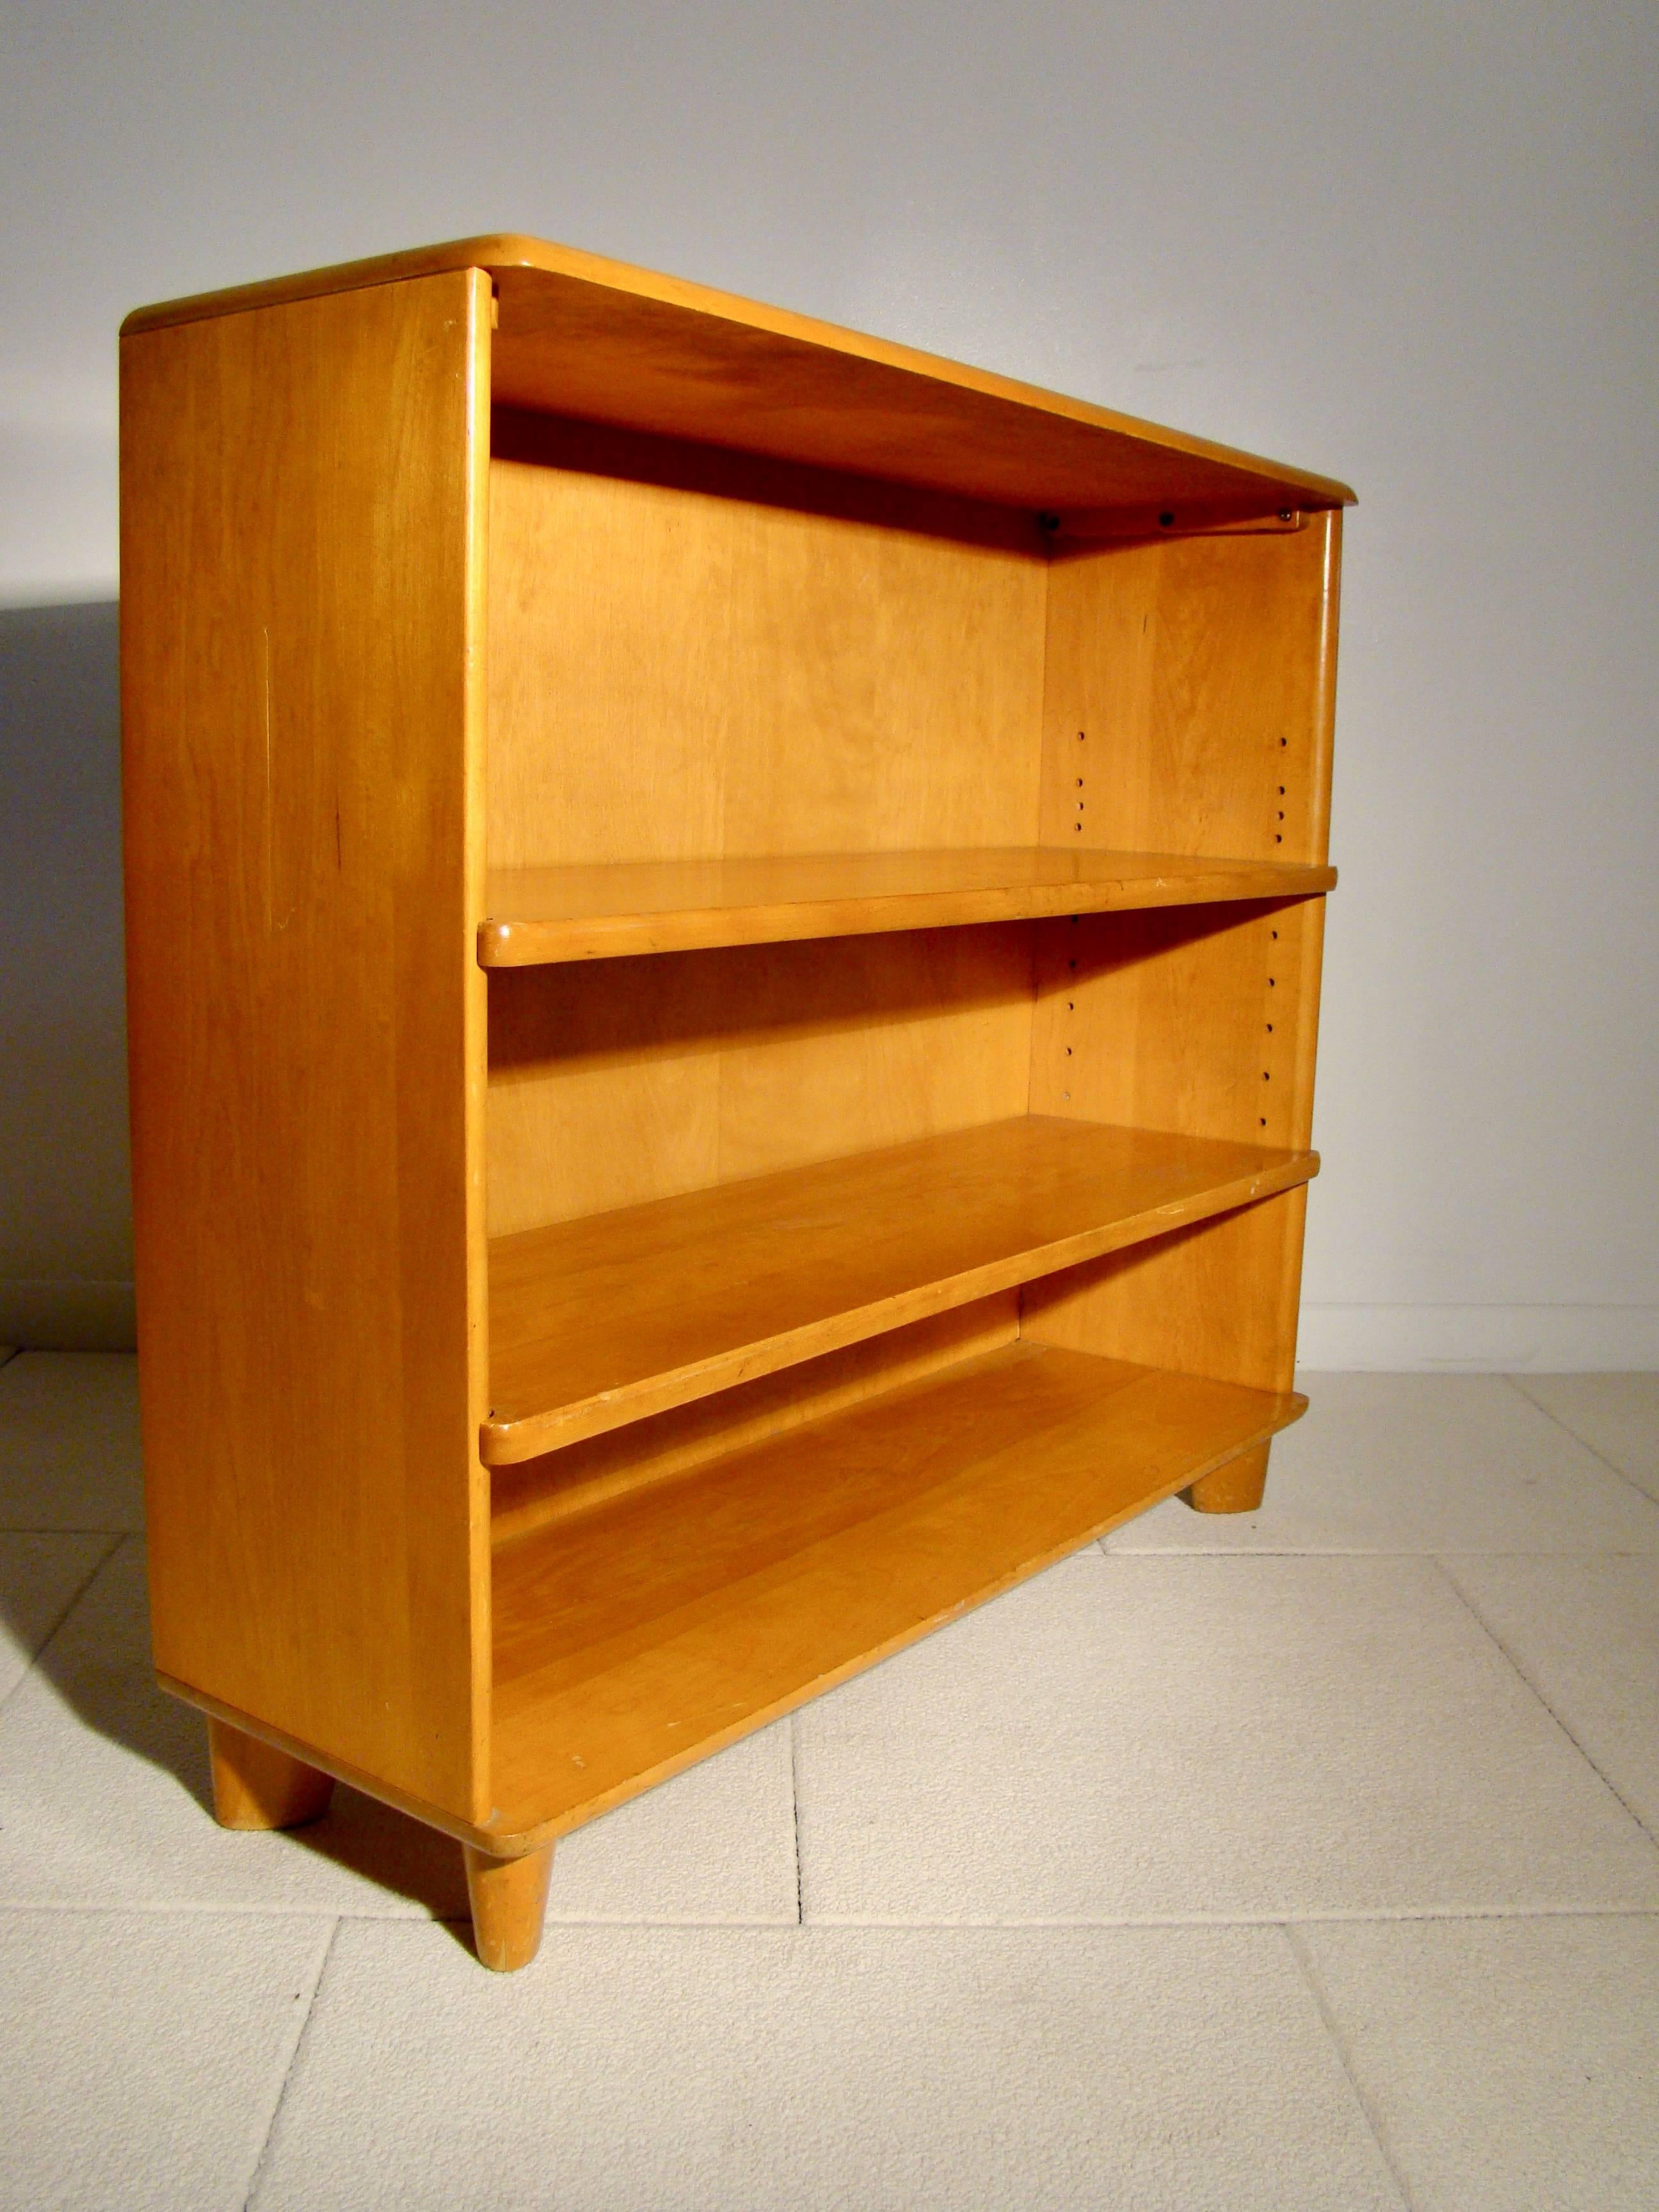 Maple Pair of Heywood Wakefield Champagne Bookcases or Cabinets